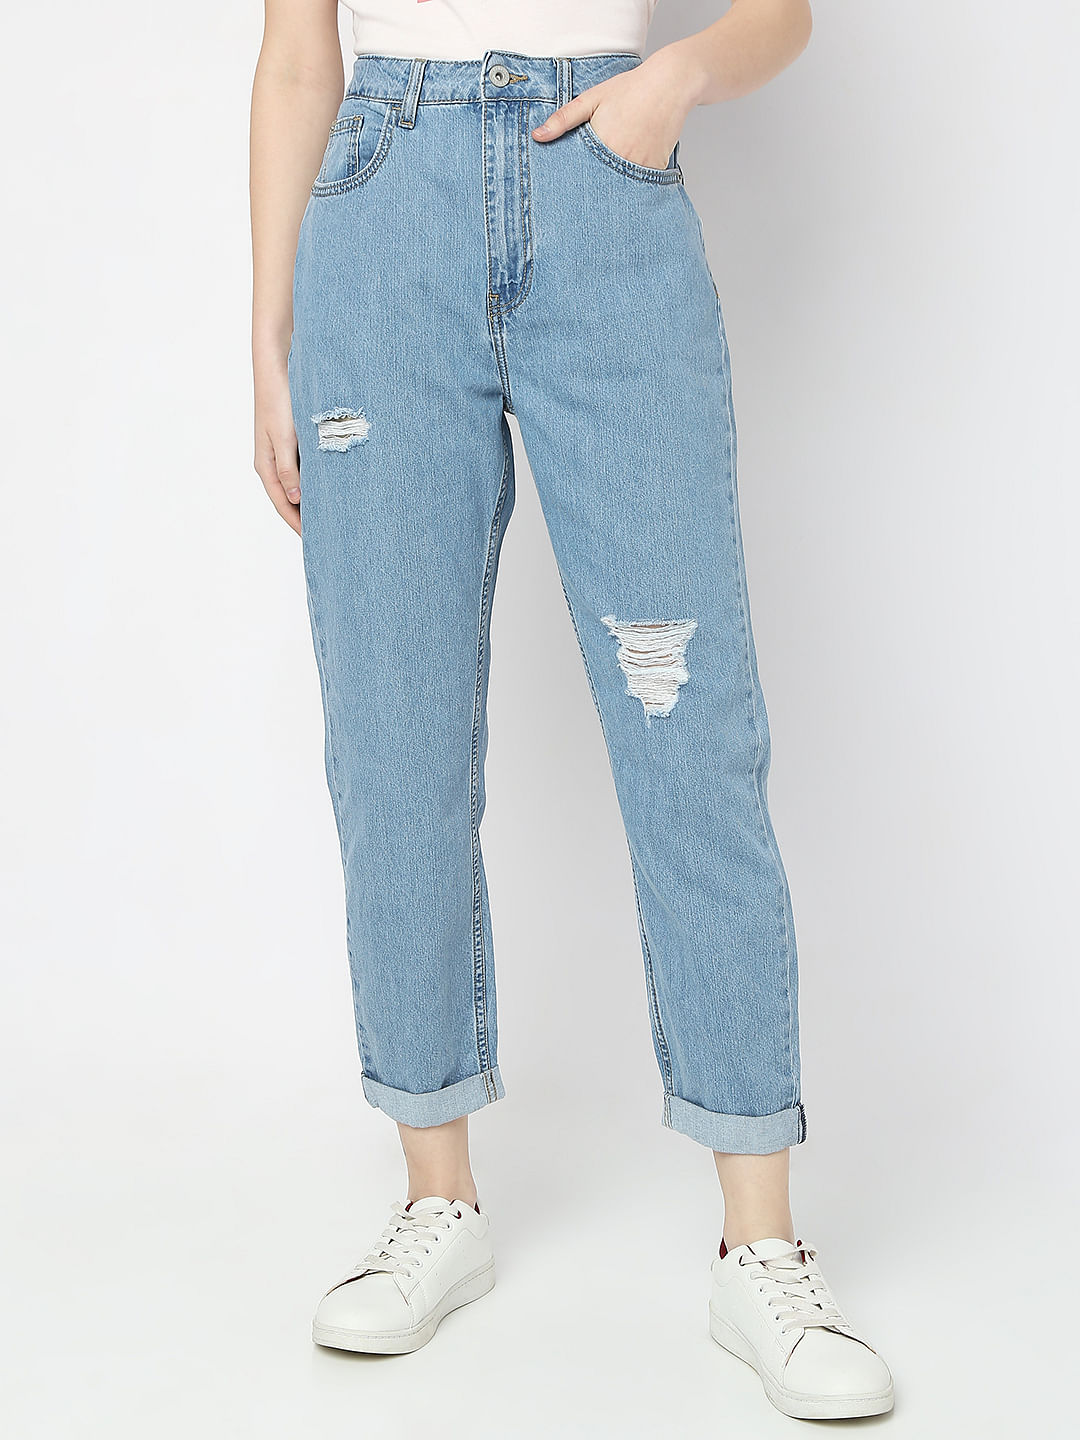 Blue High Rise Distressed Girlfriend Fit Jeans